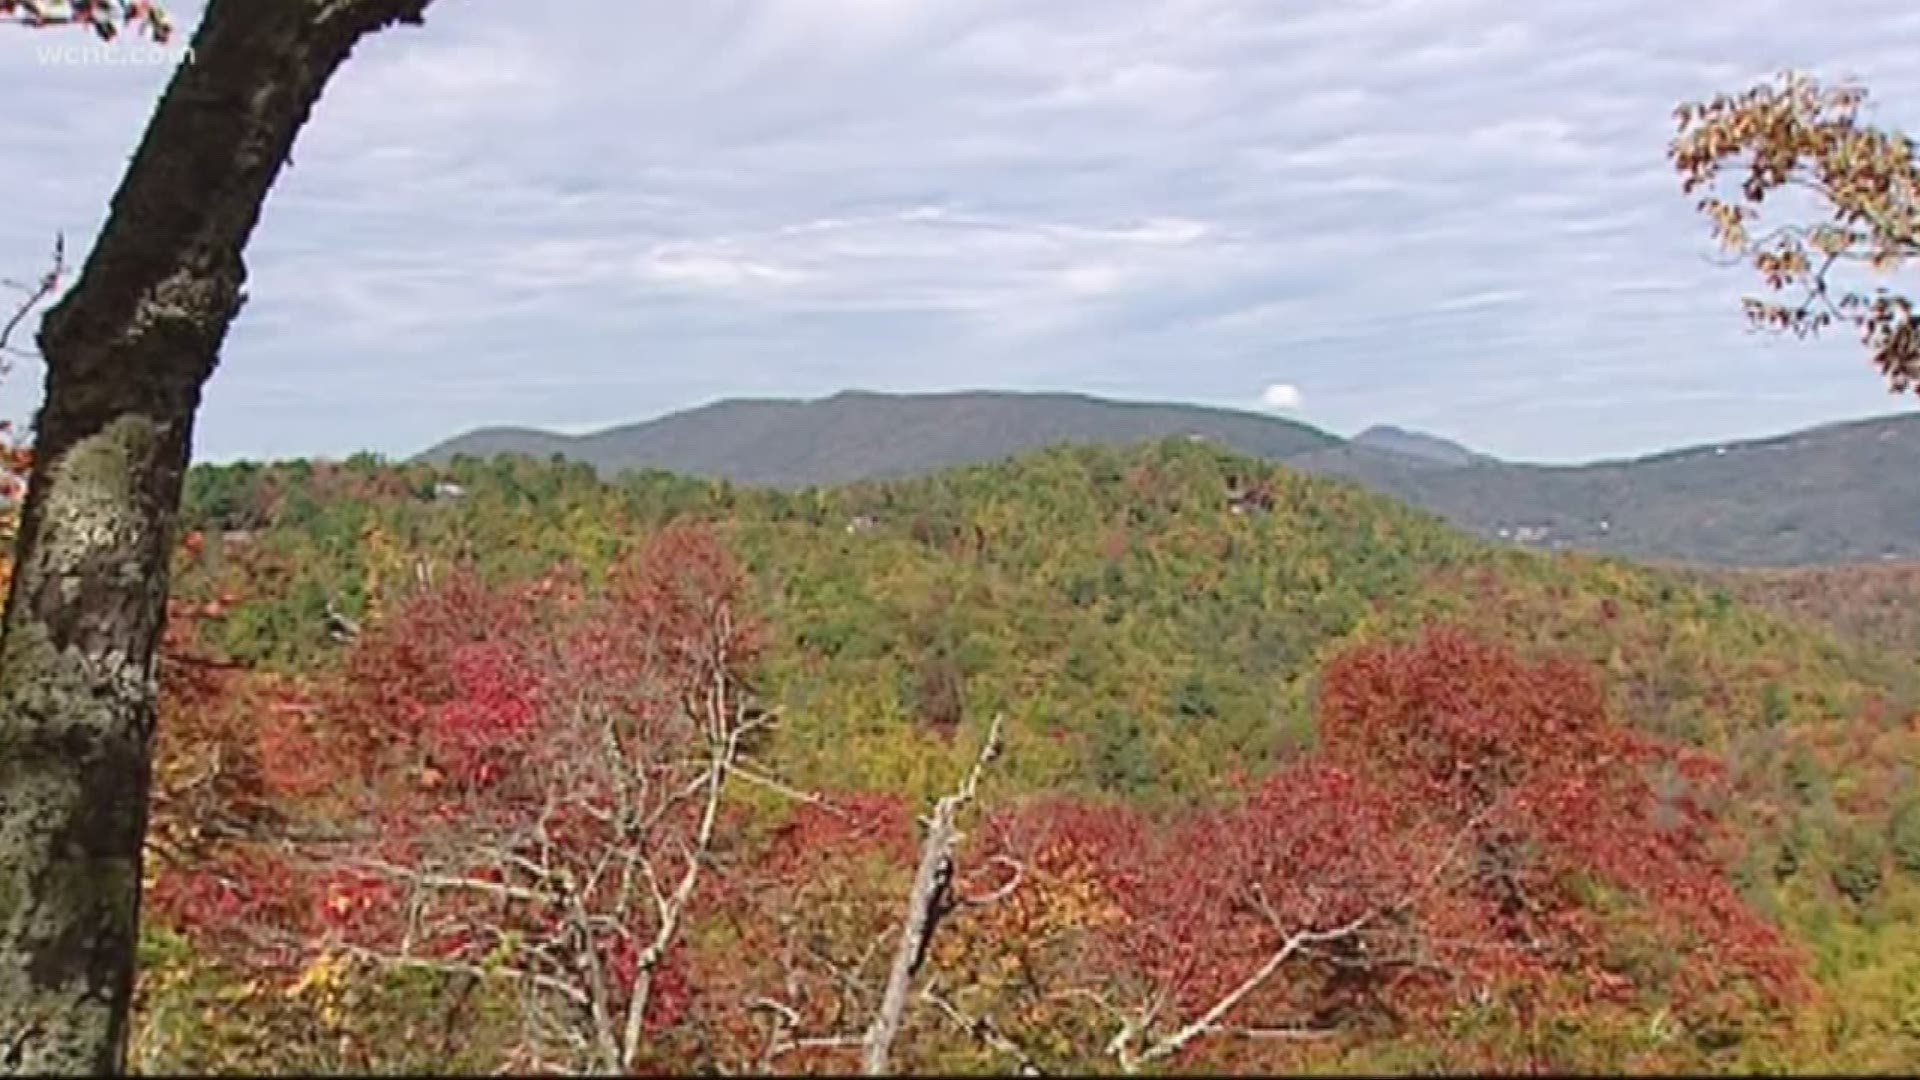 The calendar says September but it still feels like summer. As a result, peak fall color in the North Carolina mountains won't be until late October, experts say.